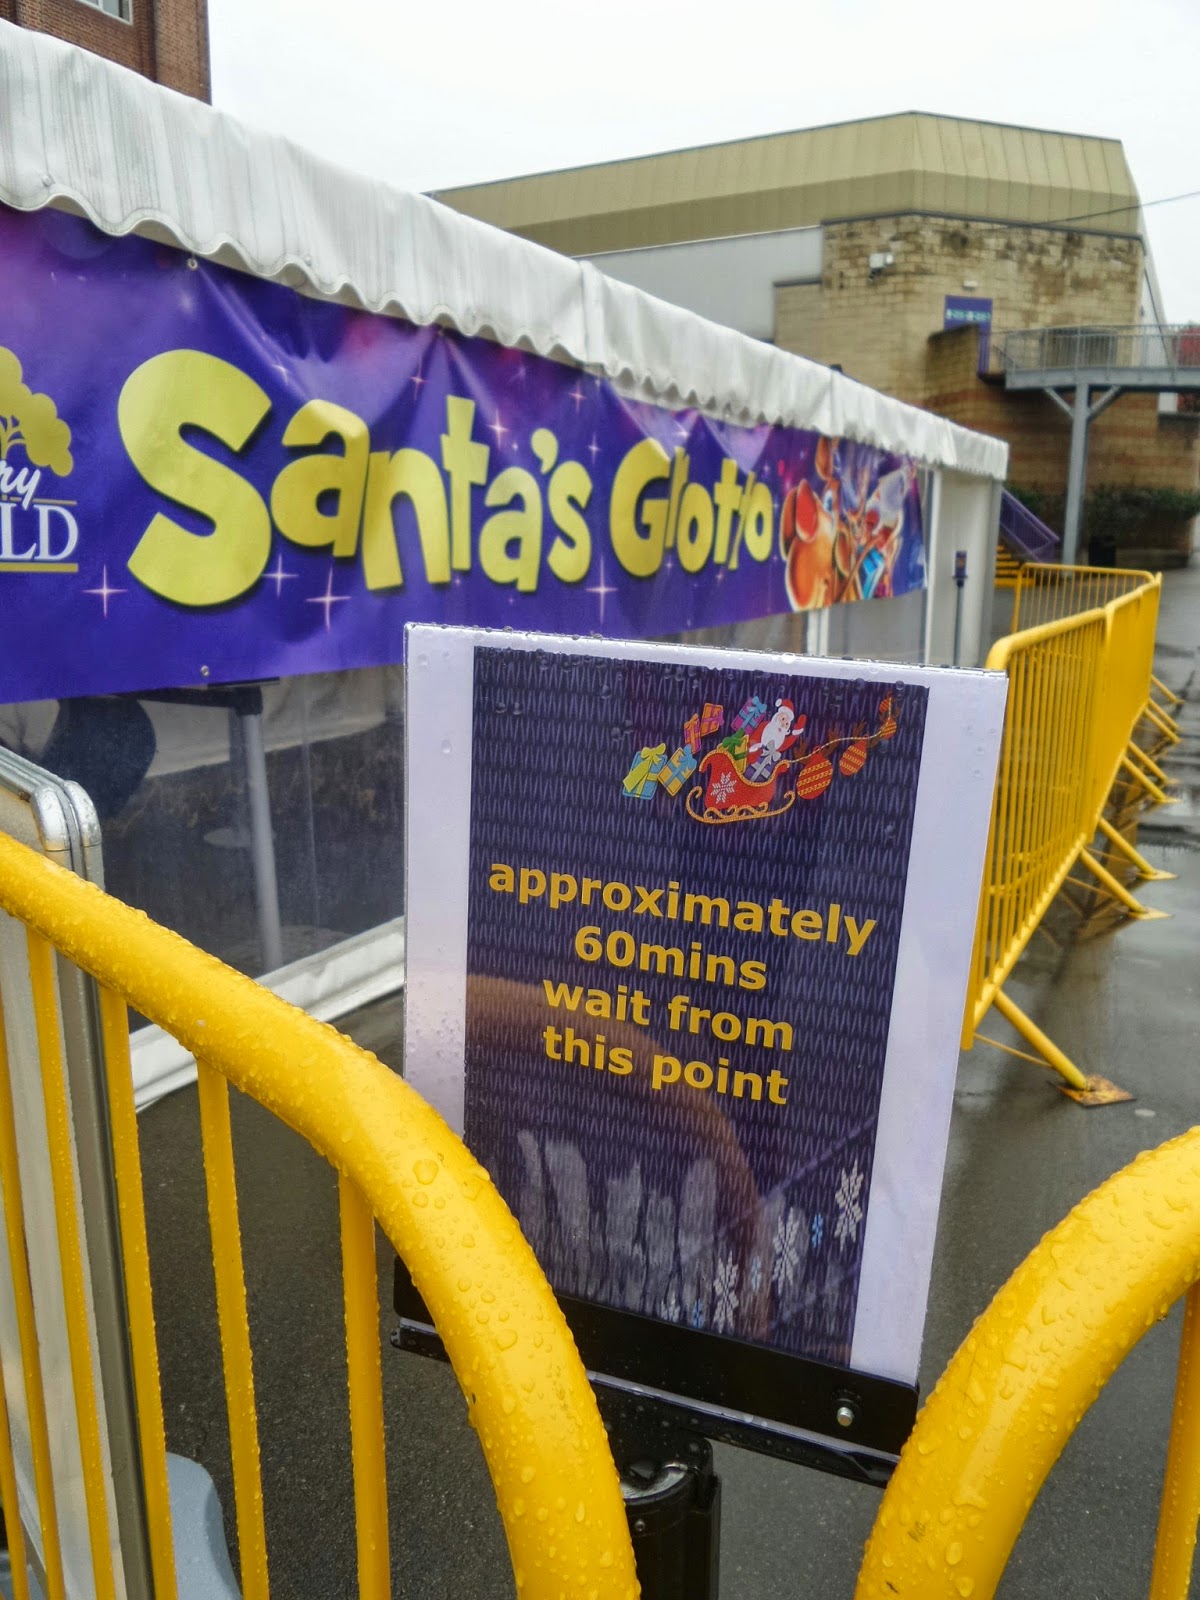 Queues can build up at Santa's Grotto, but it's quite fast moving